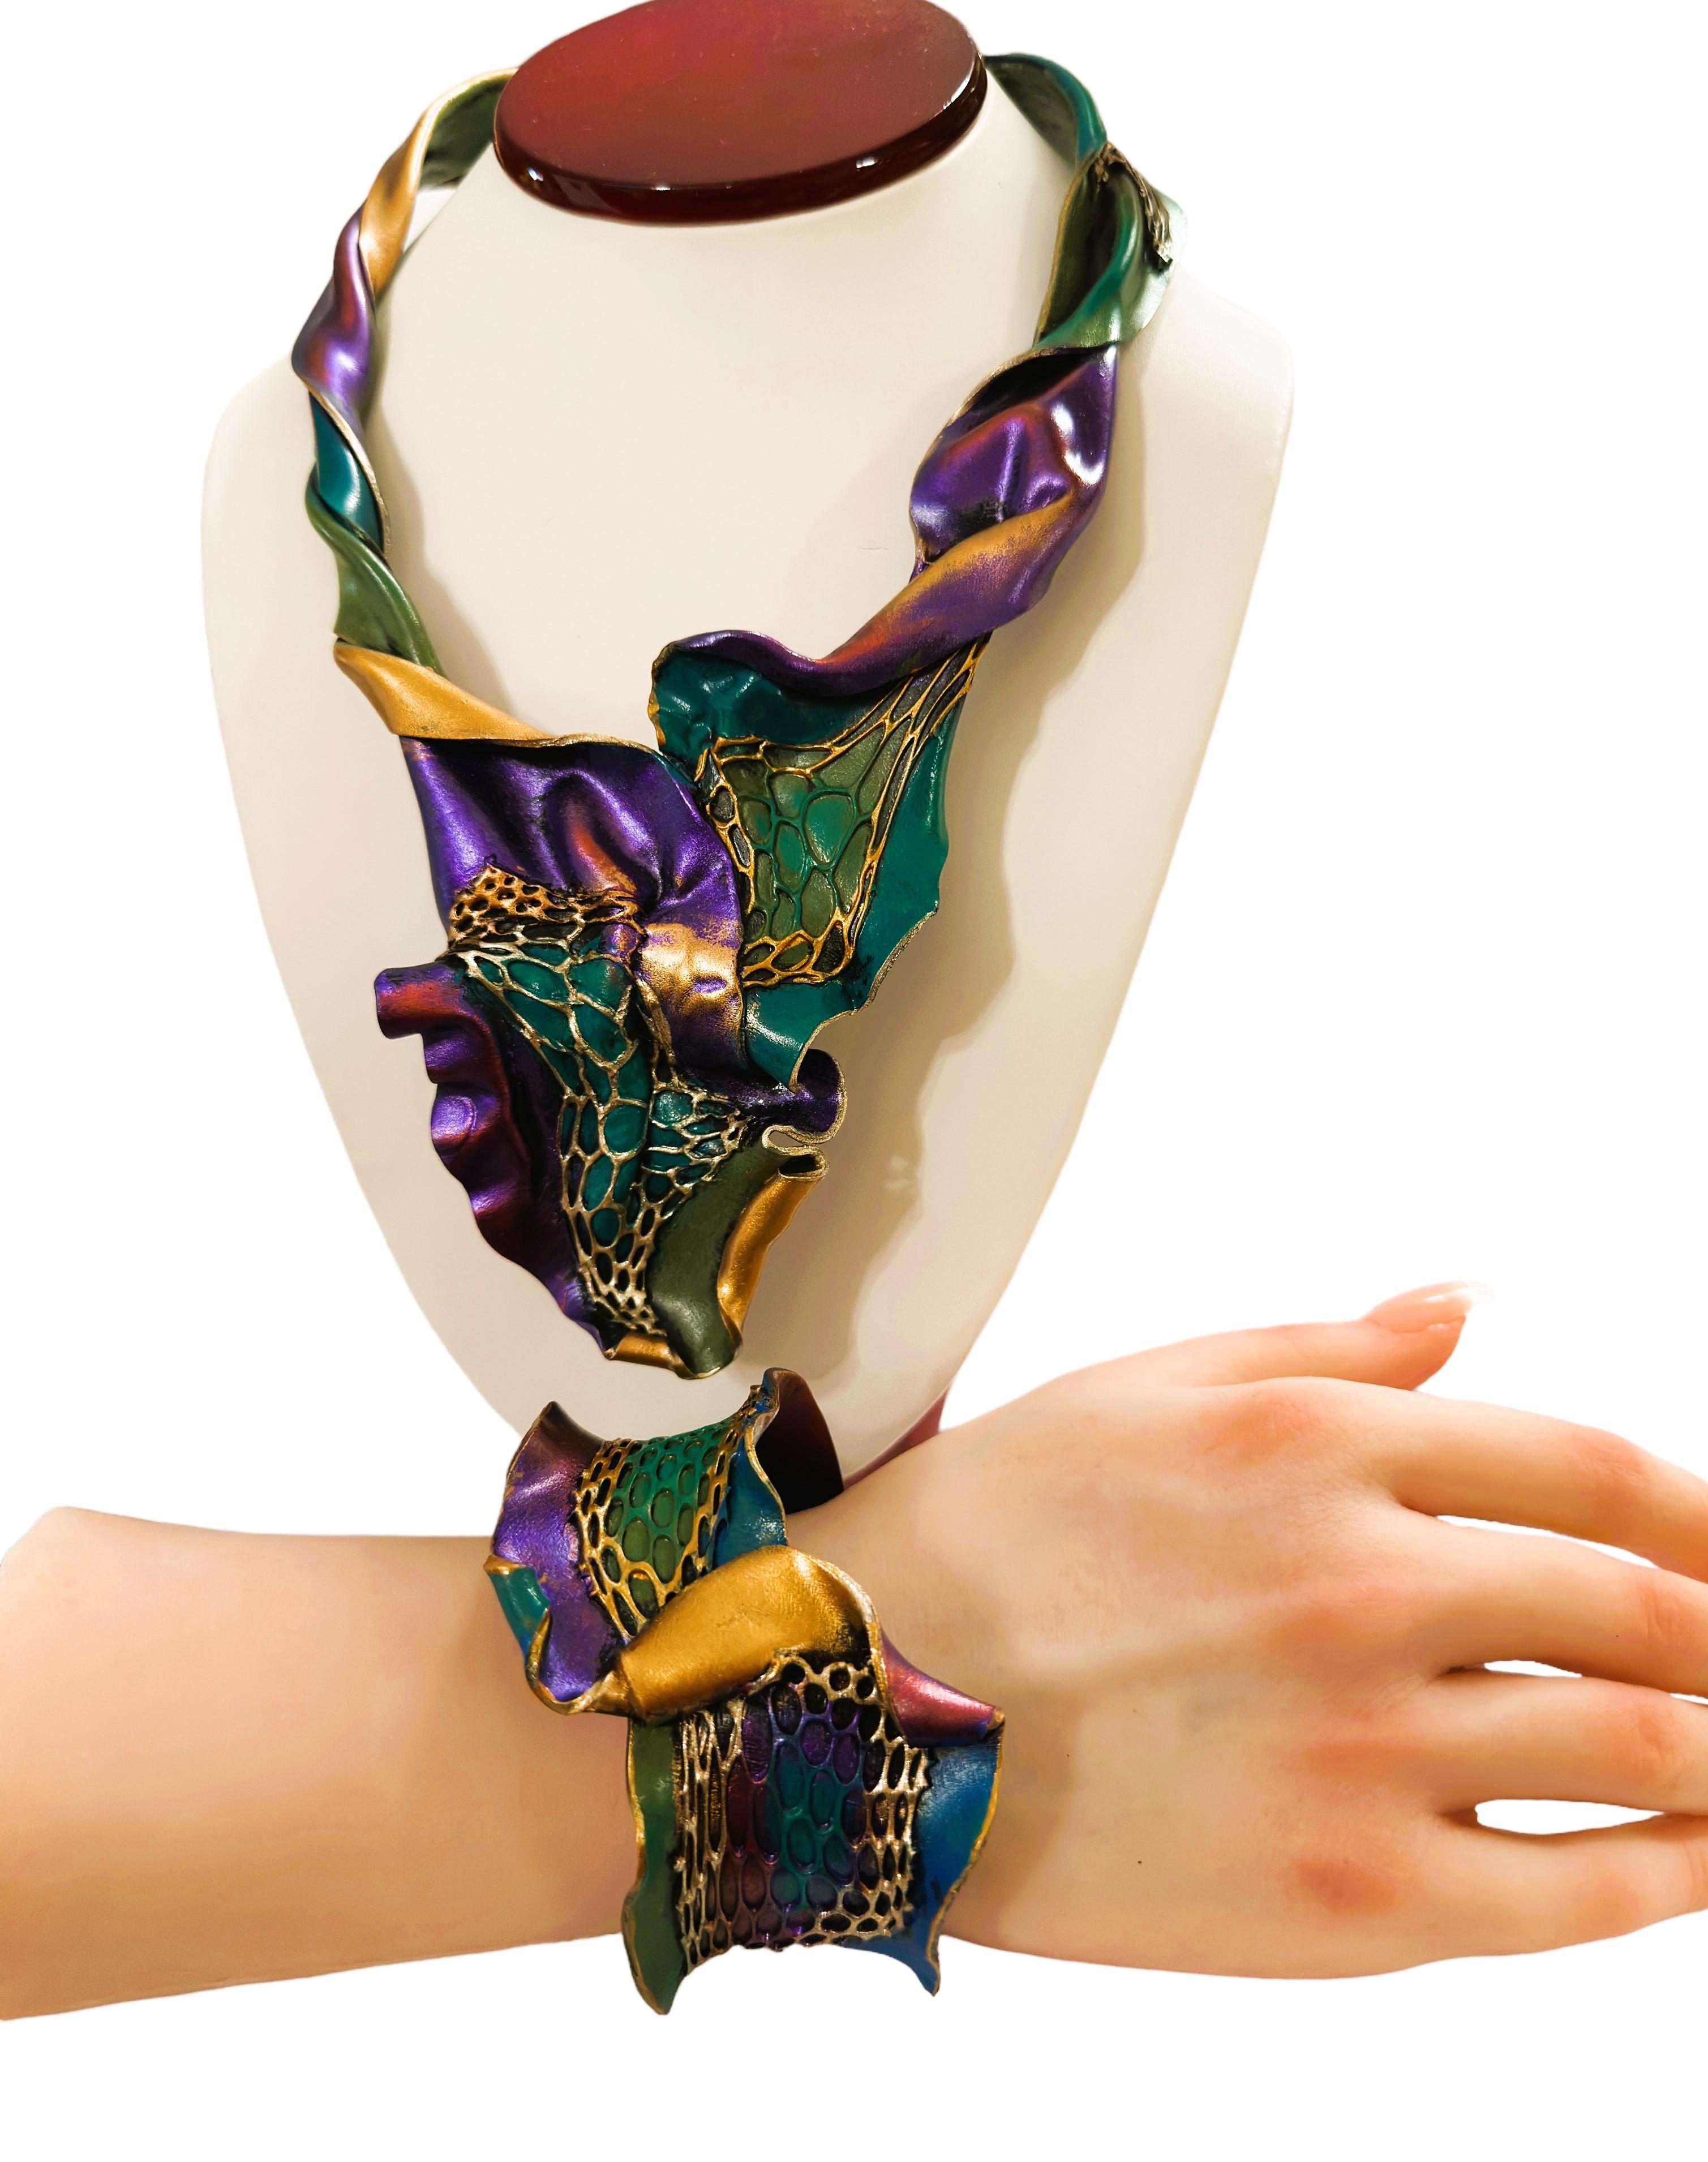 The Jeanique line is created by South African Artist Jean Houndsome.  Her creations come in bold beautiful colors. I have a matching cuff Necklace with a matching cuff Bracelet   The necklace is made to fit any size neck.  Total length of the